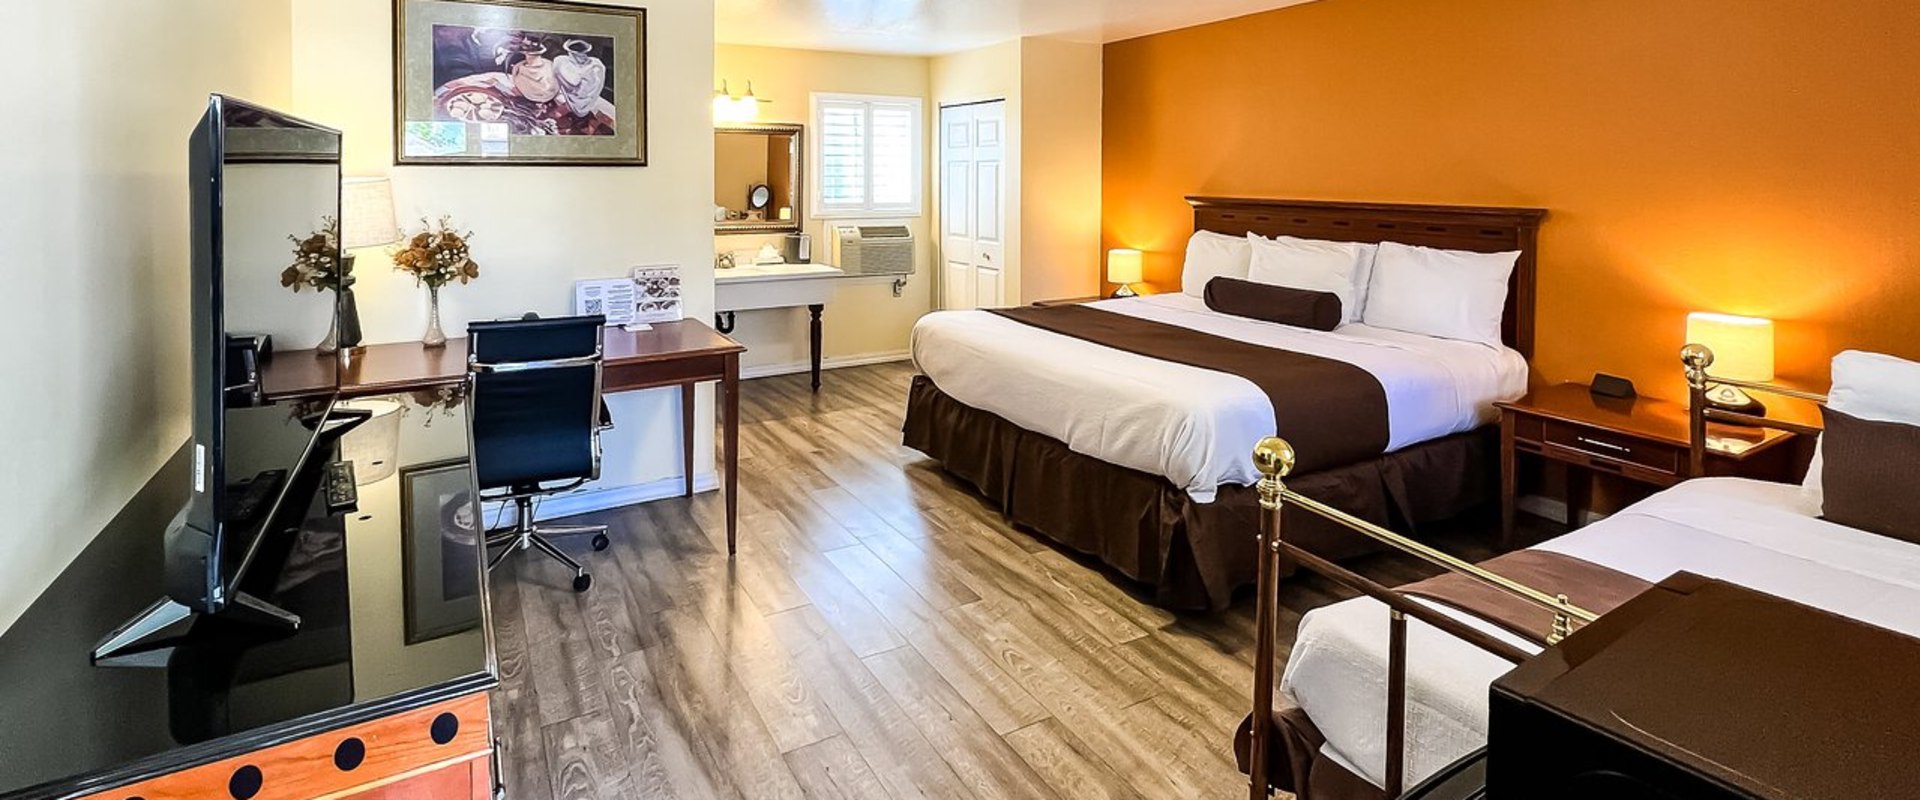 What is the Average Check-Out Time for Rooms at Inn & Suites in Northern California?